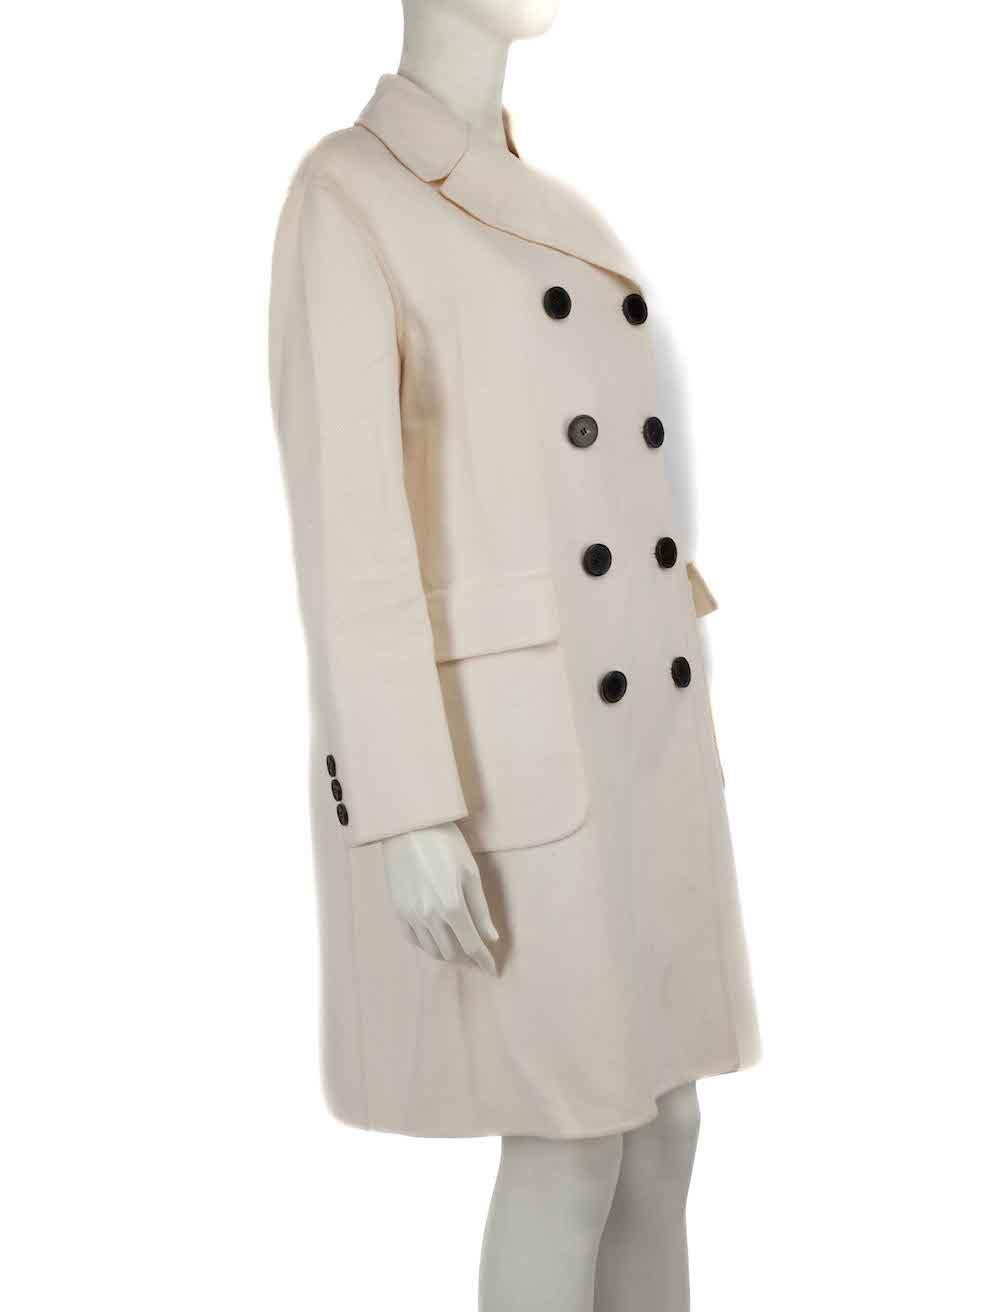 CONDITION is Very good. Minimal wear to coat is evident. Minimal wear to the fabric surface with a couple of very small, light discoloured marks found at the left cuff and belt strap on this used Burberry Brit designer resale item. This item comes